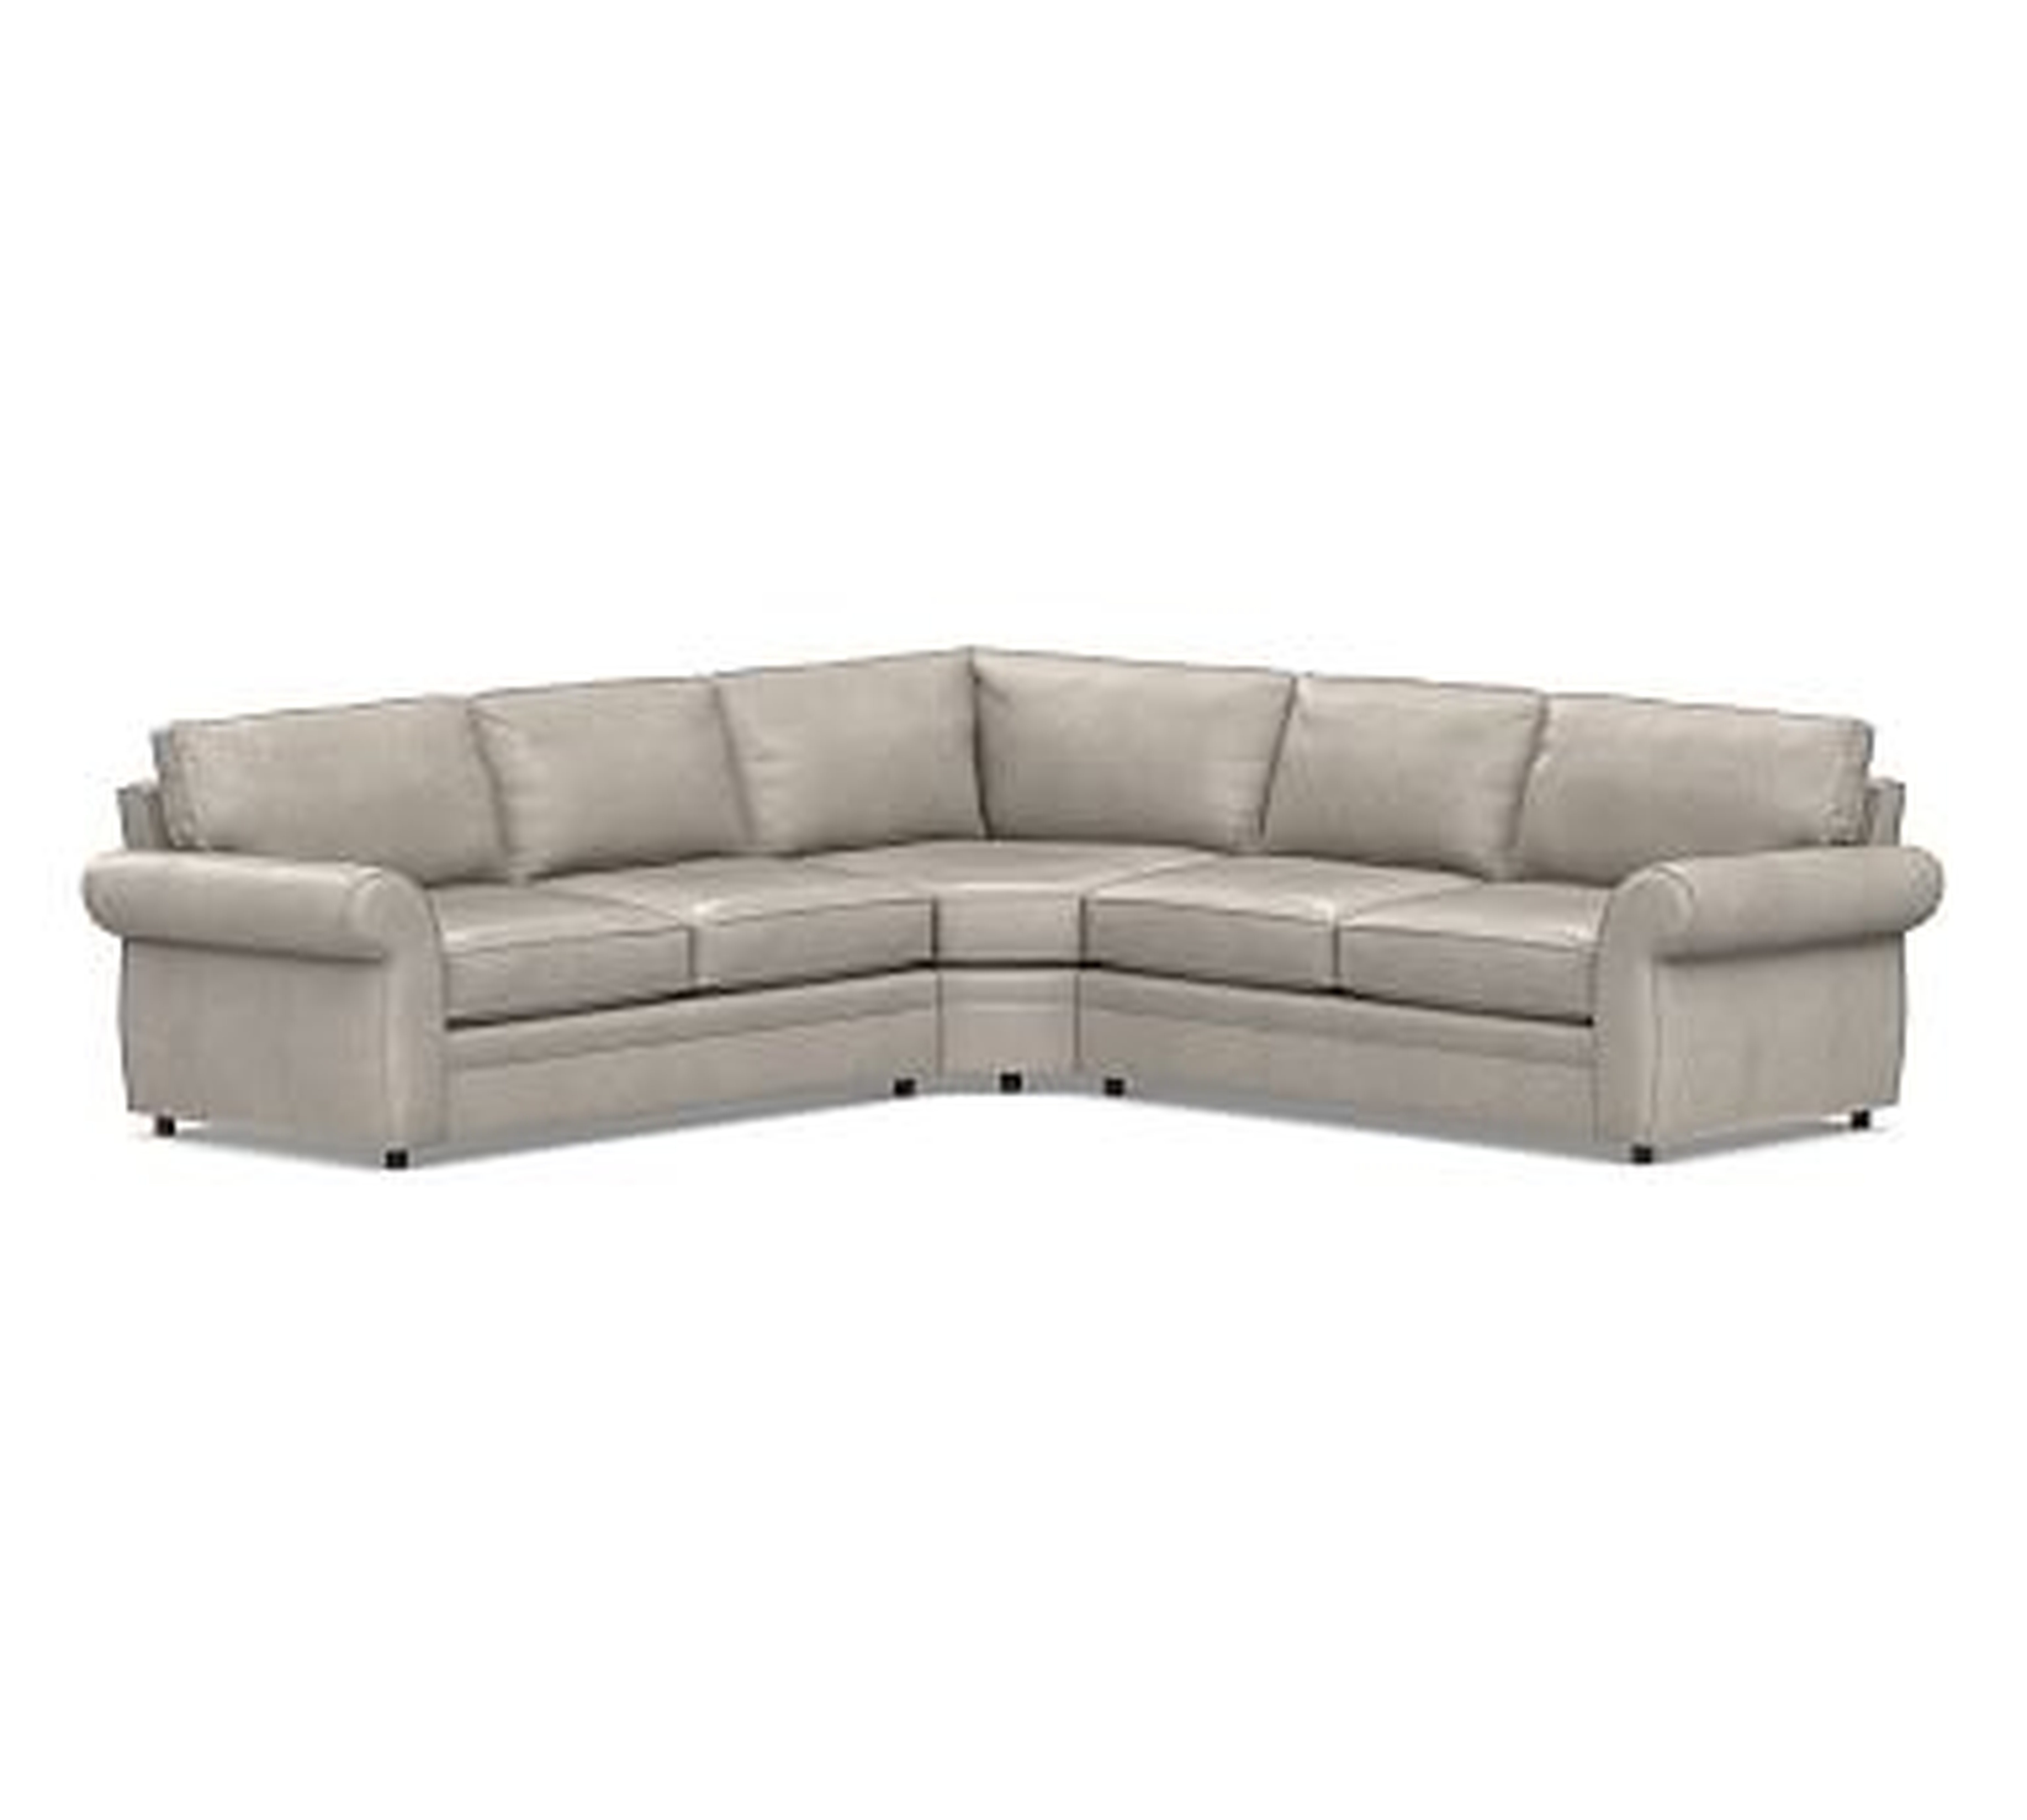 Pearce Roll Arm Leather 3-Piece L-Shaped Wedge Sectional, Polyester Wrapped Cushions, Statesville Pebble - Pottery Barn